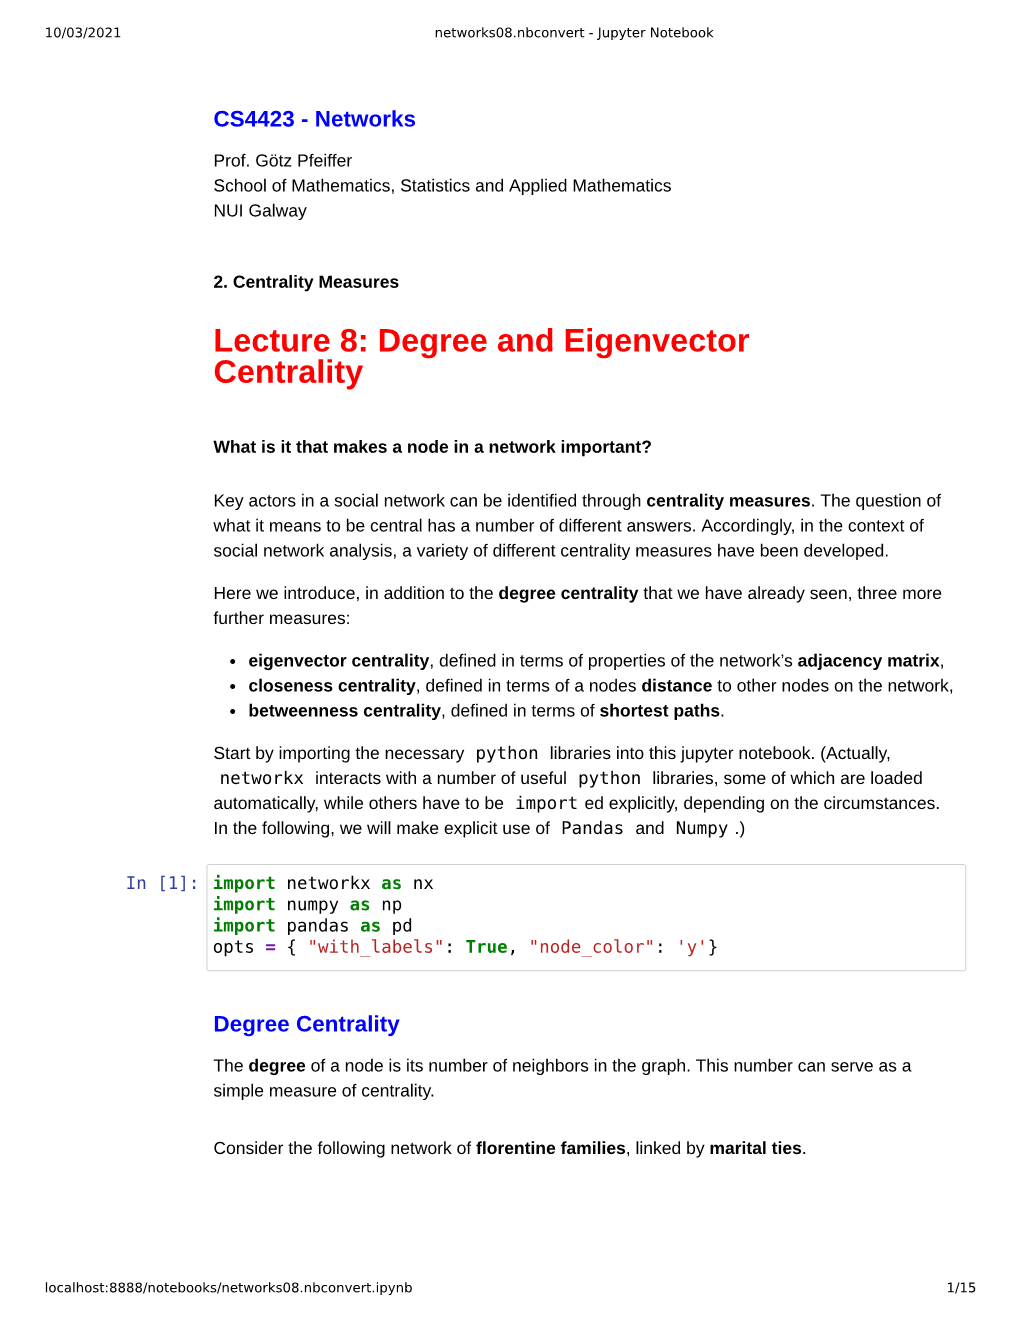 Degree and Eigenvector Centrality